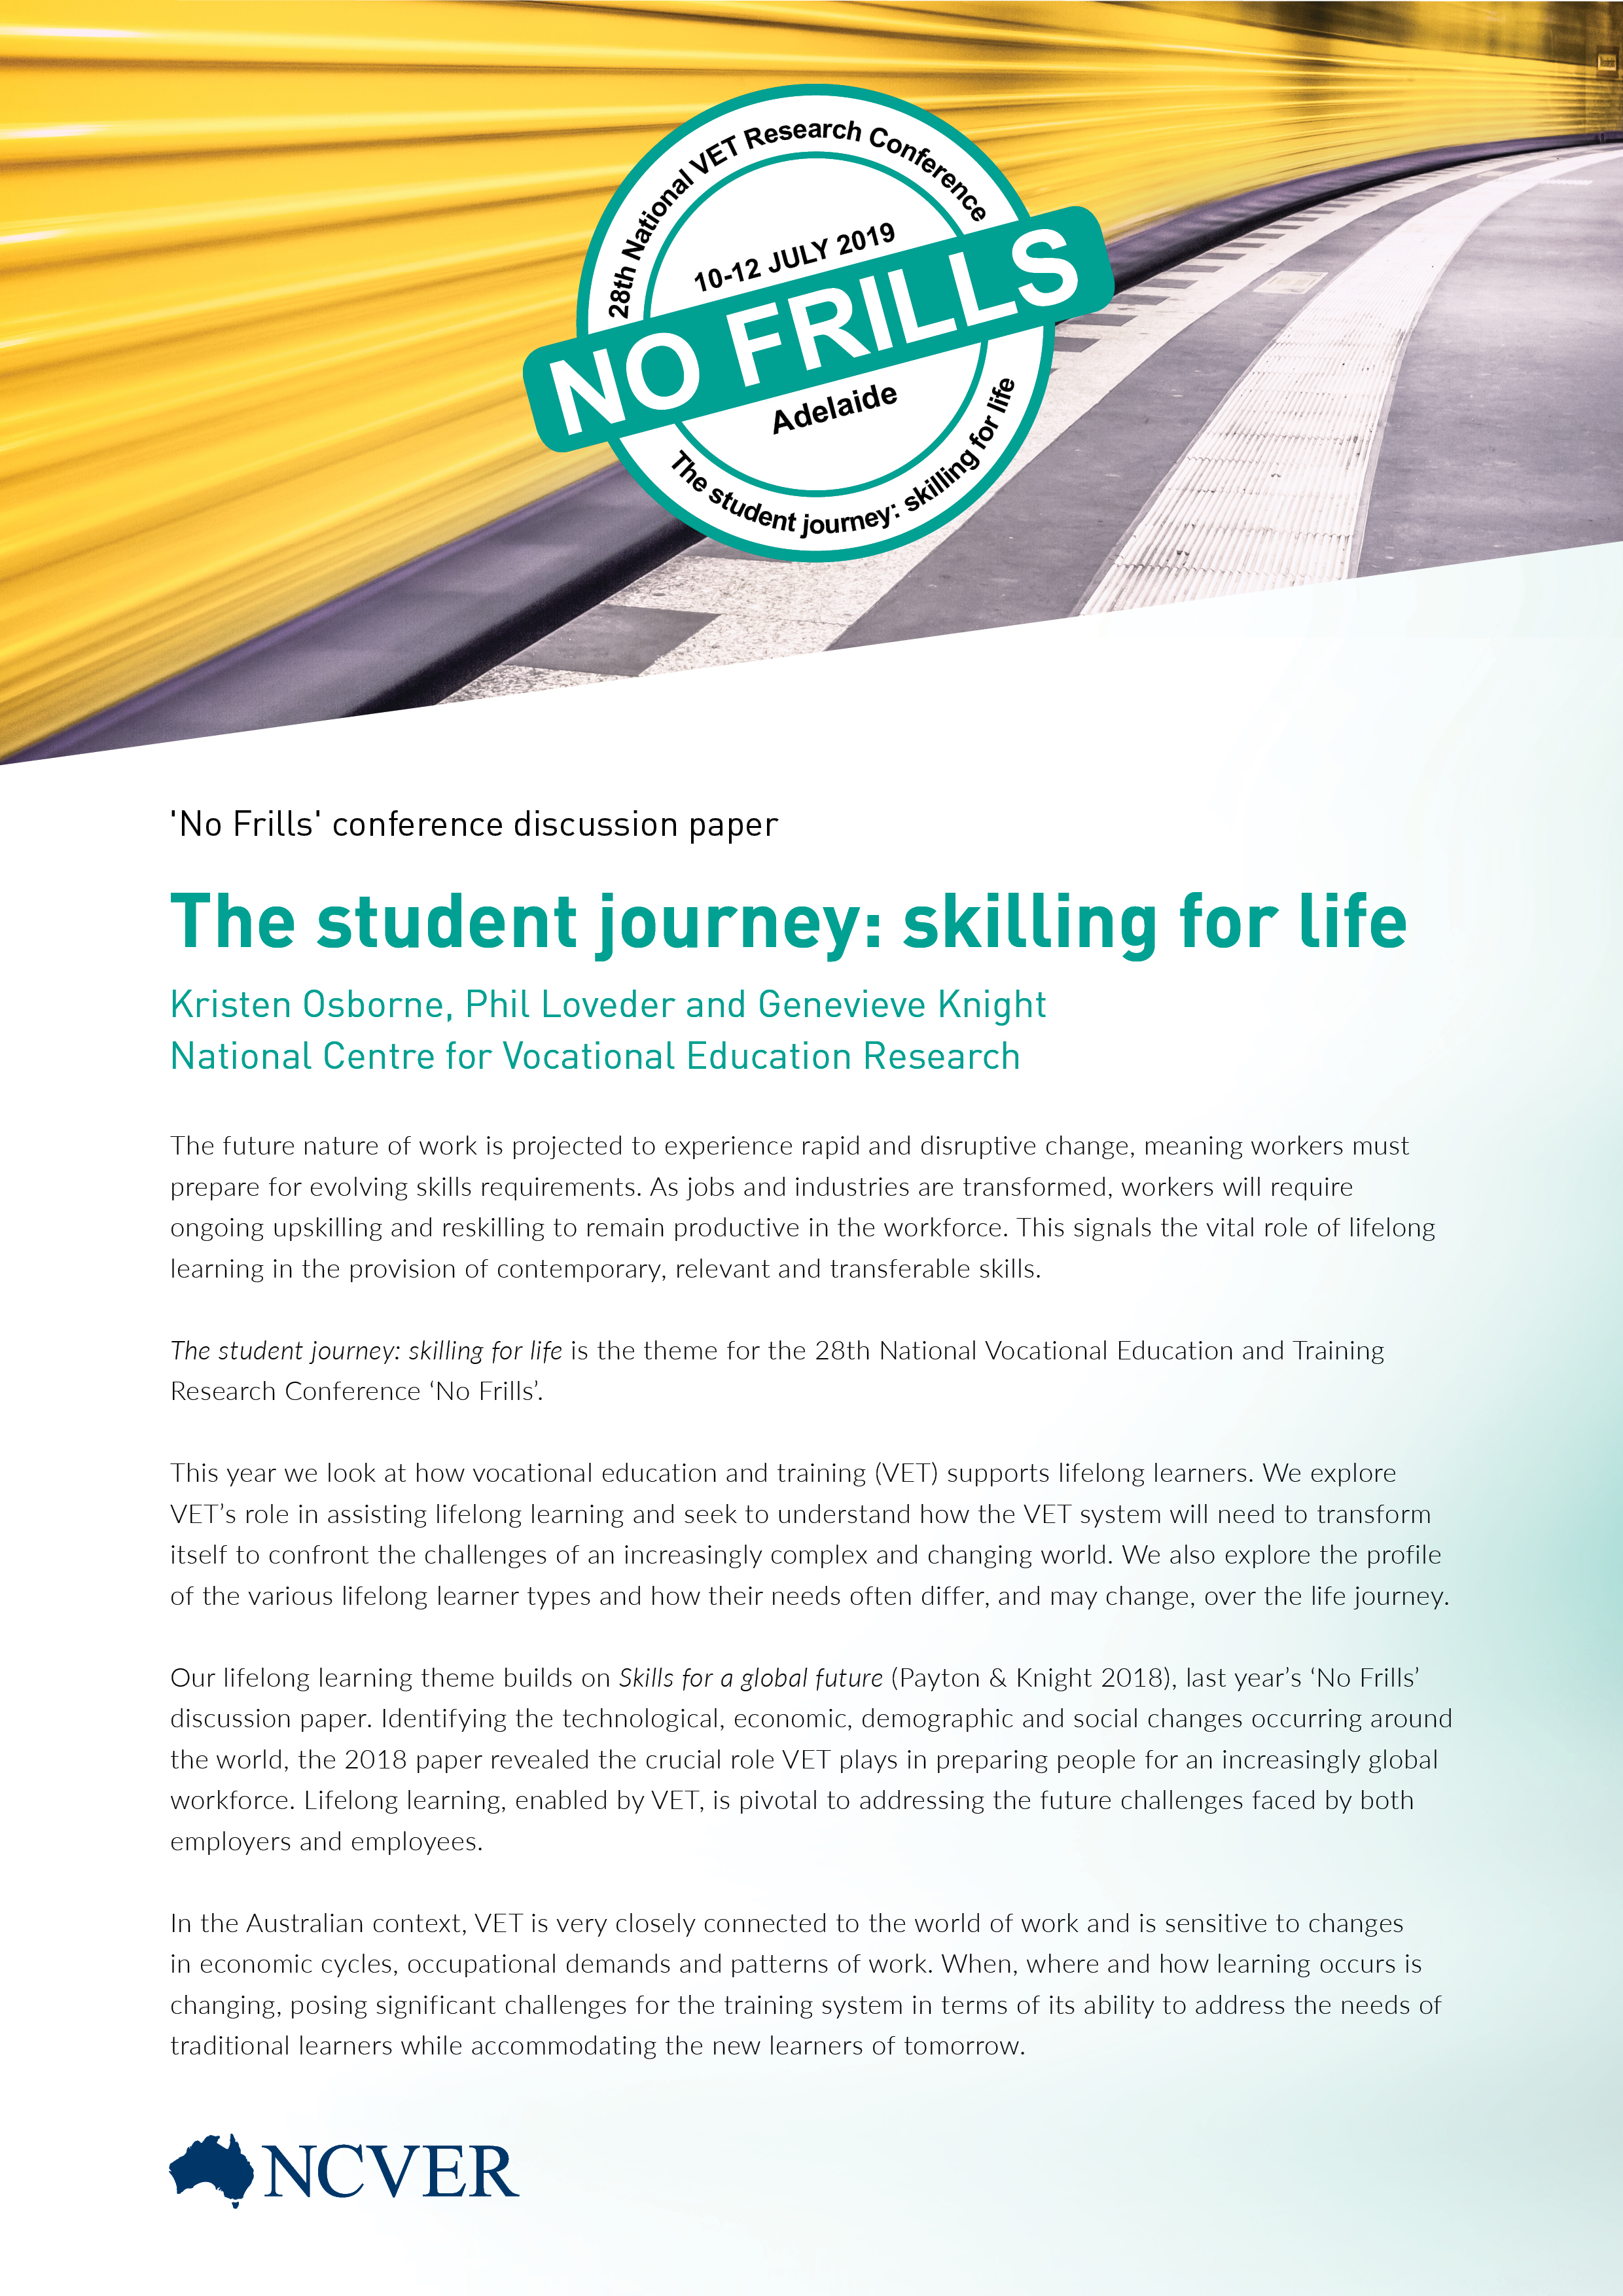 The student journey: skilling for life